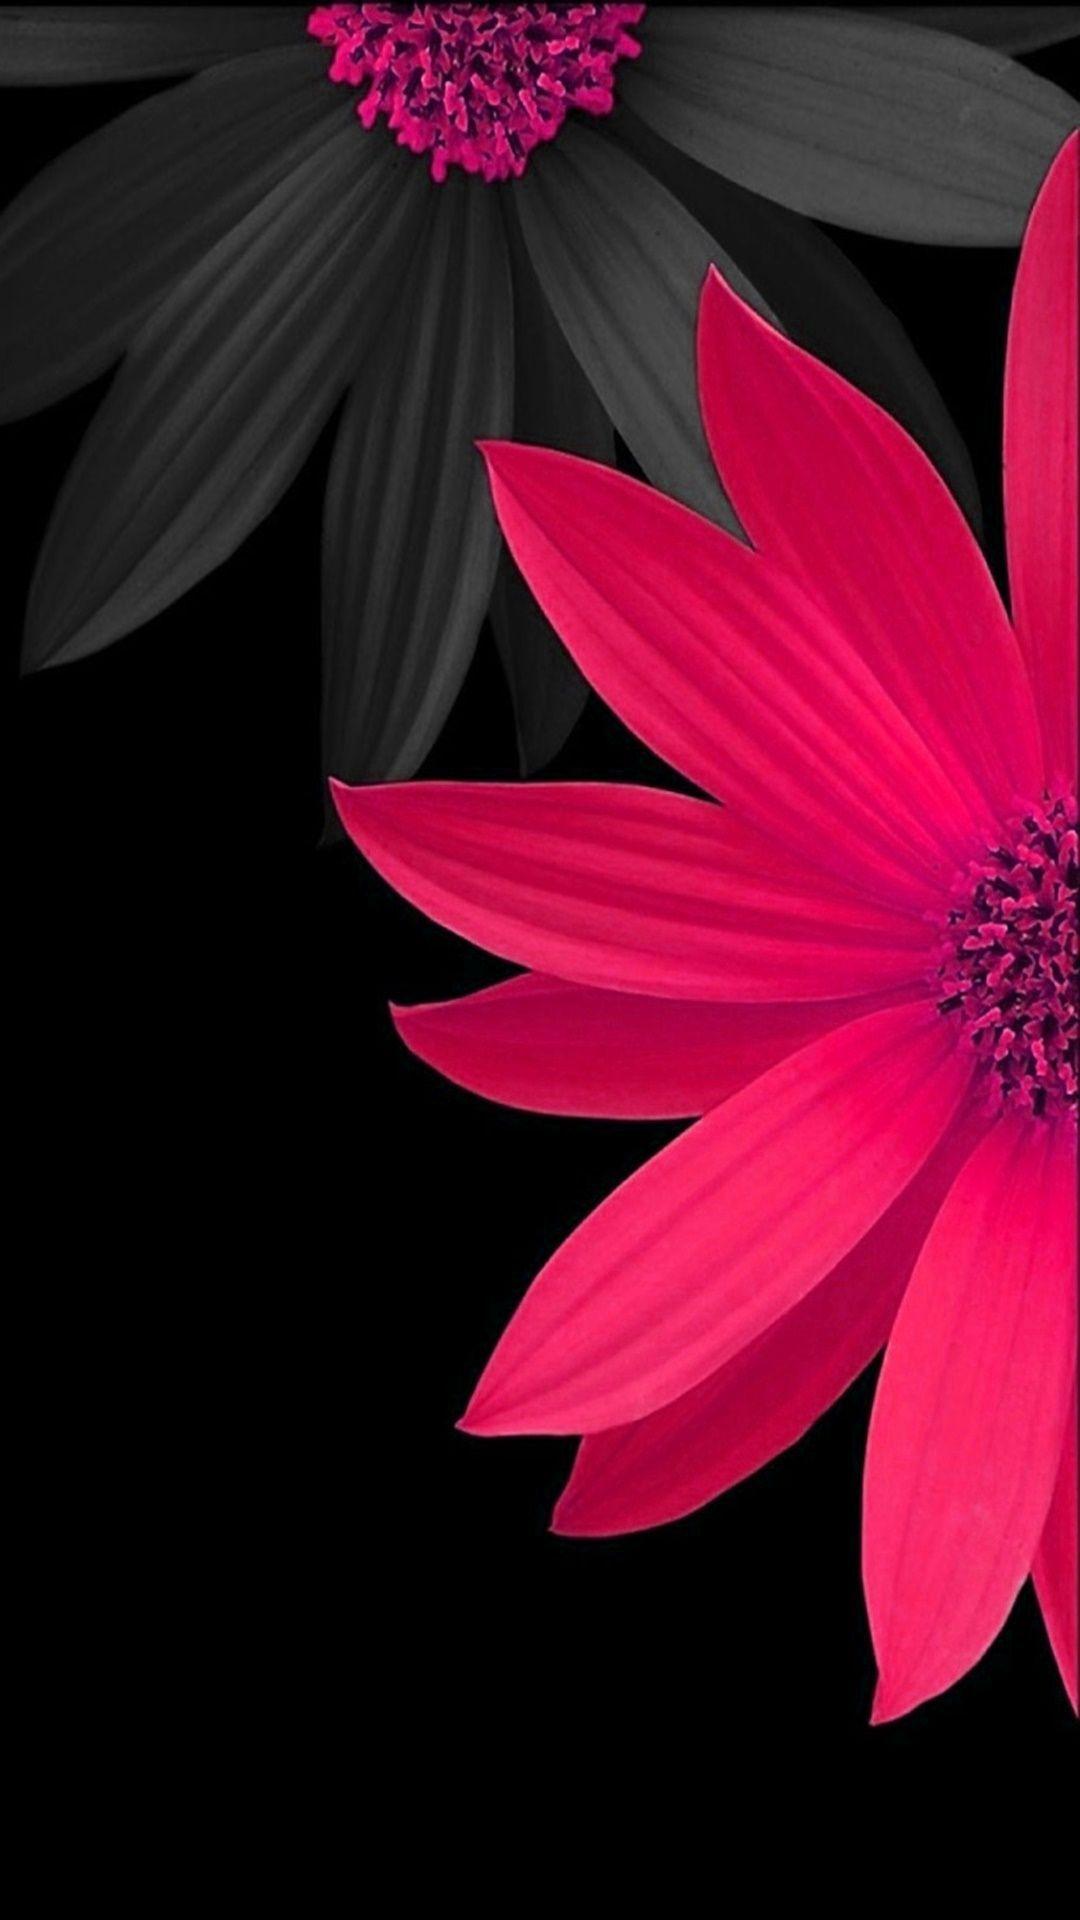 Black And Pink Iphone Wallpapers Top Free Black And Pink Iphone Backgrounds Wallpaperaccess